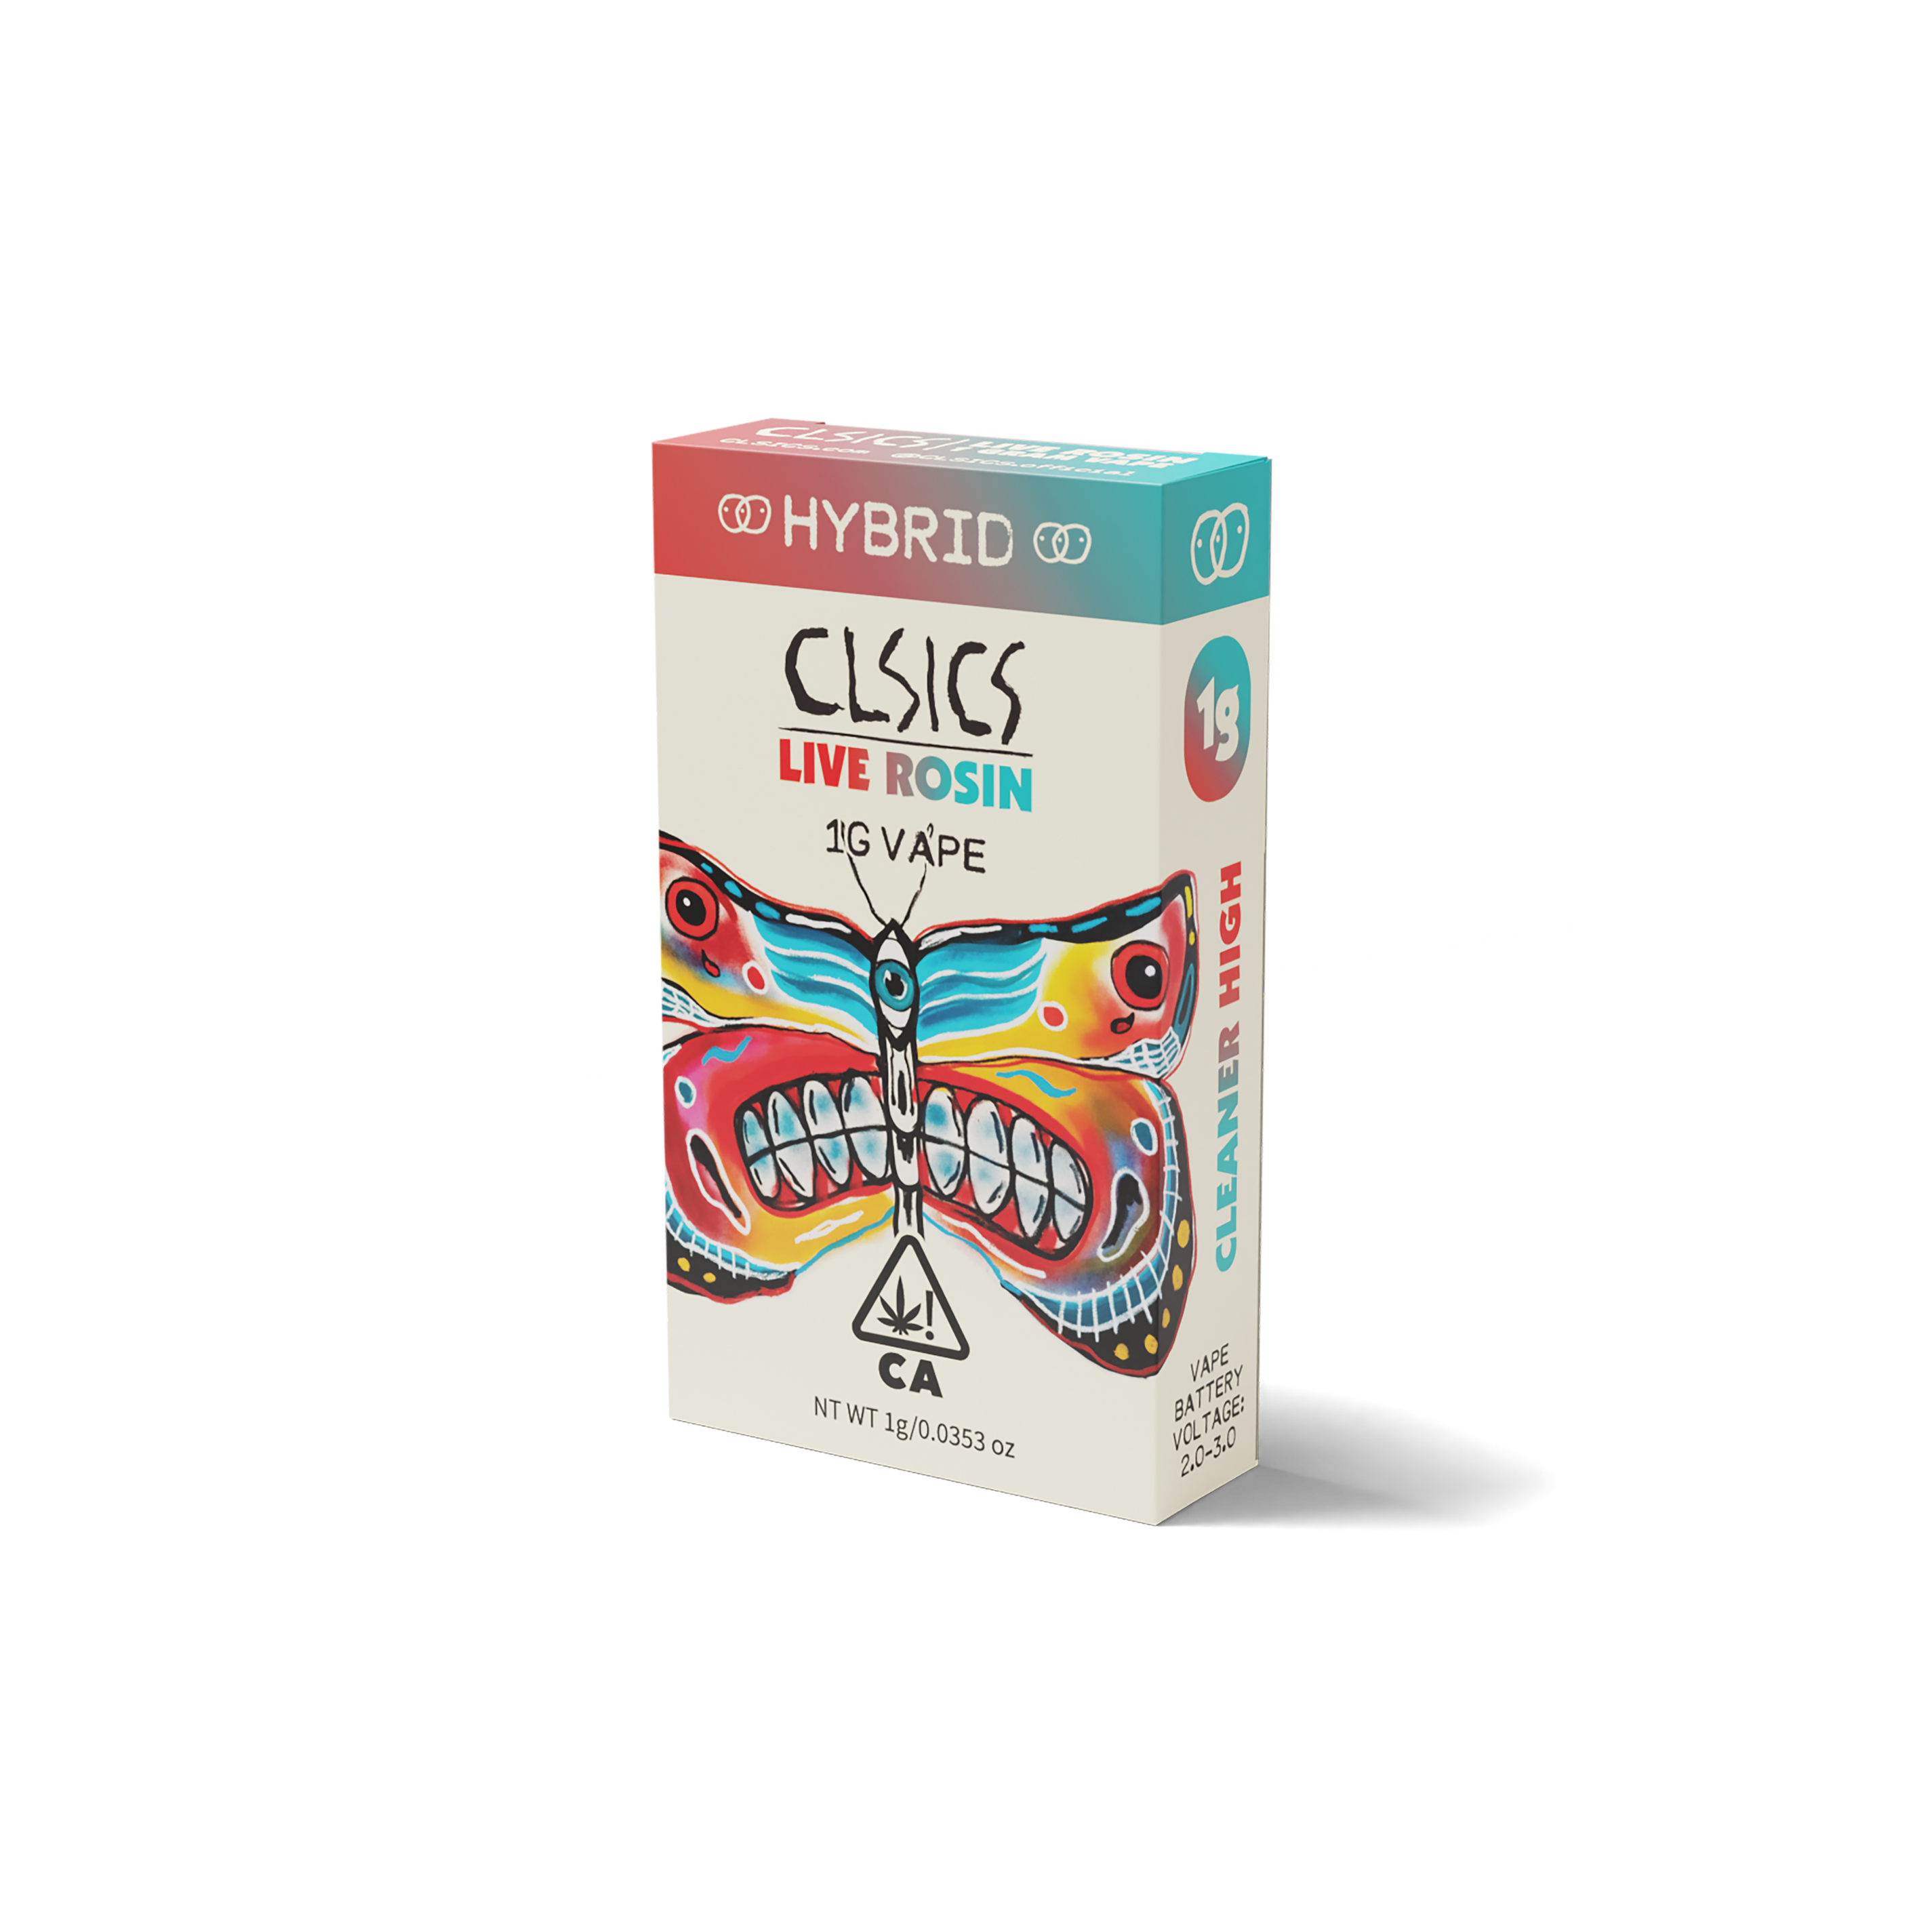 A photograph of CLSICS Live Rosin Cartridge 1g Hybrid Sweet Tooth